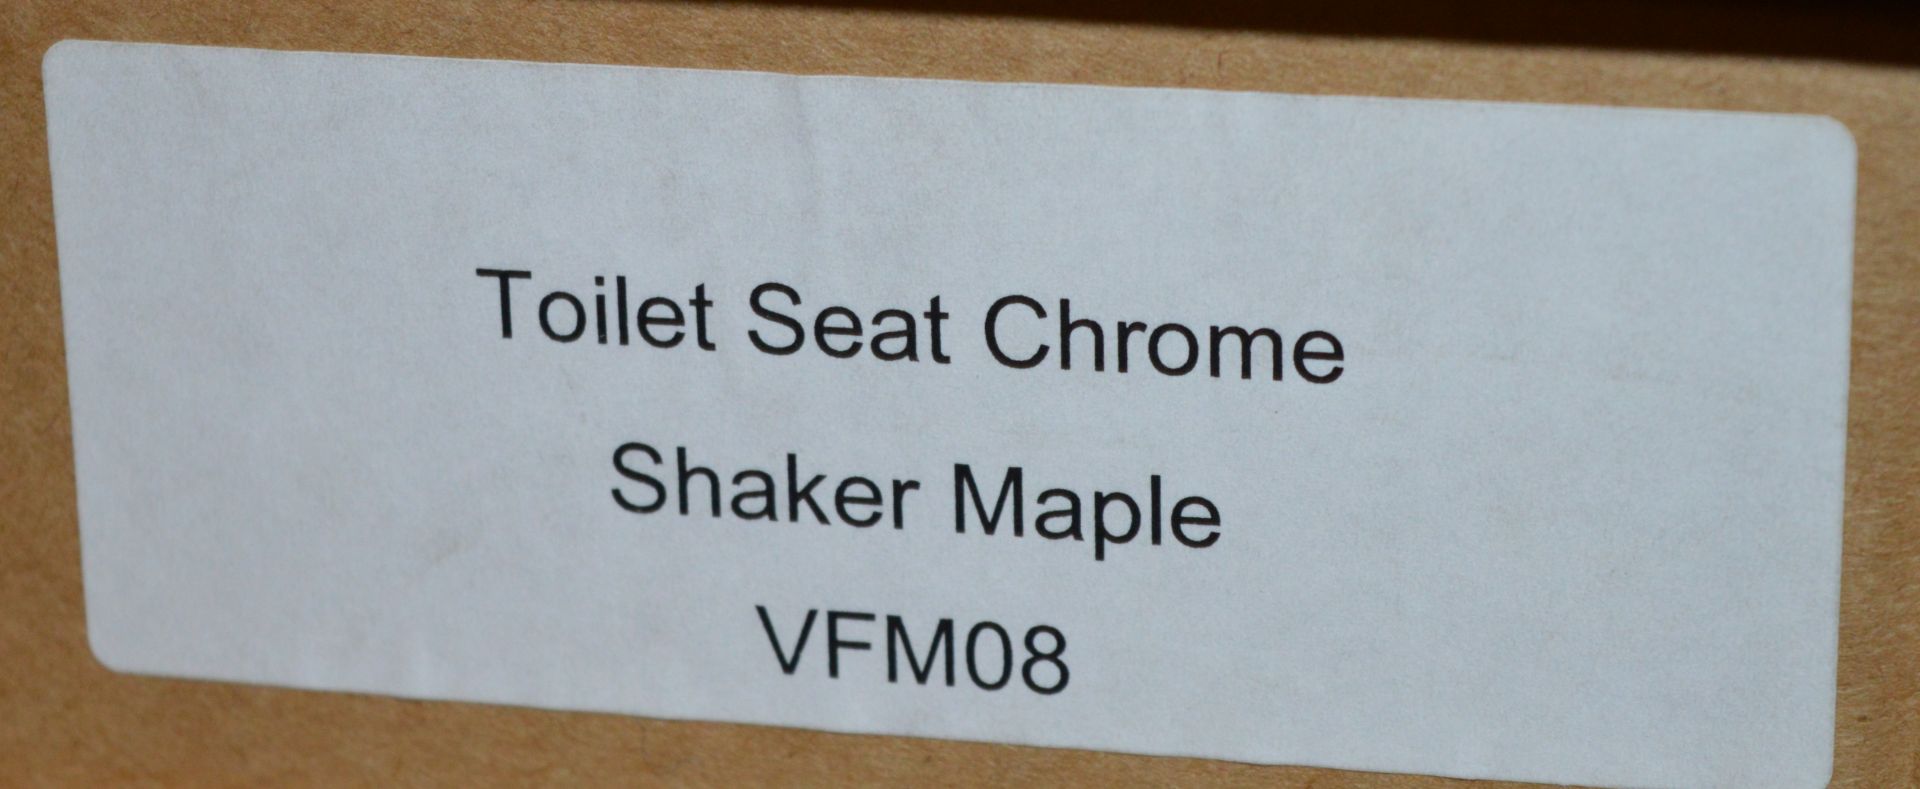 5 x Shaker Maple Wooden Toilet Seats With Chrome Fittings - Type VFM08 - High Quality Vogue - Image 2 of 5